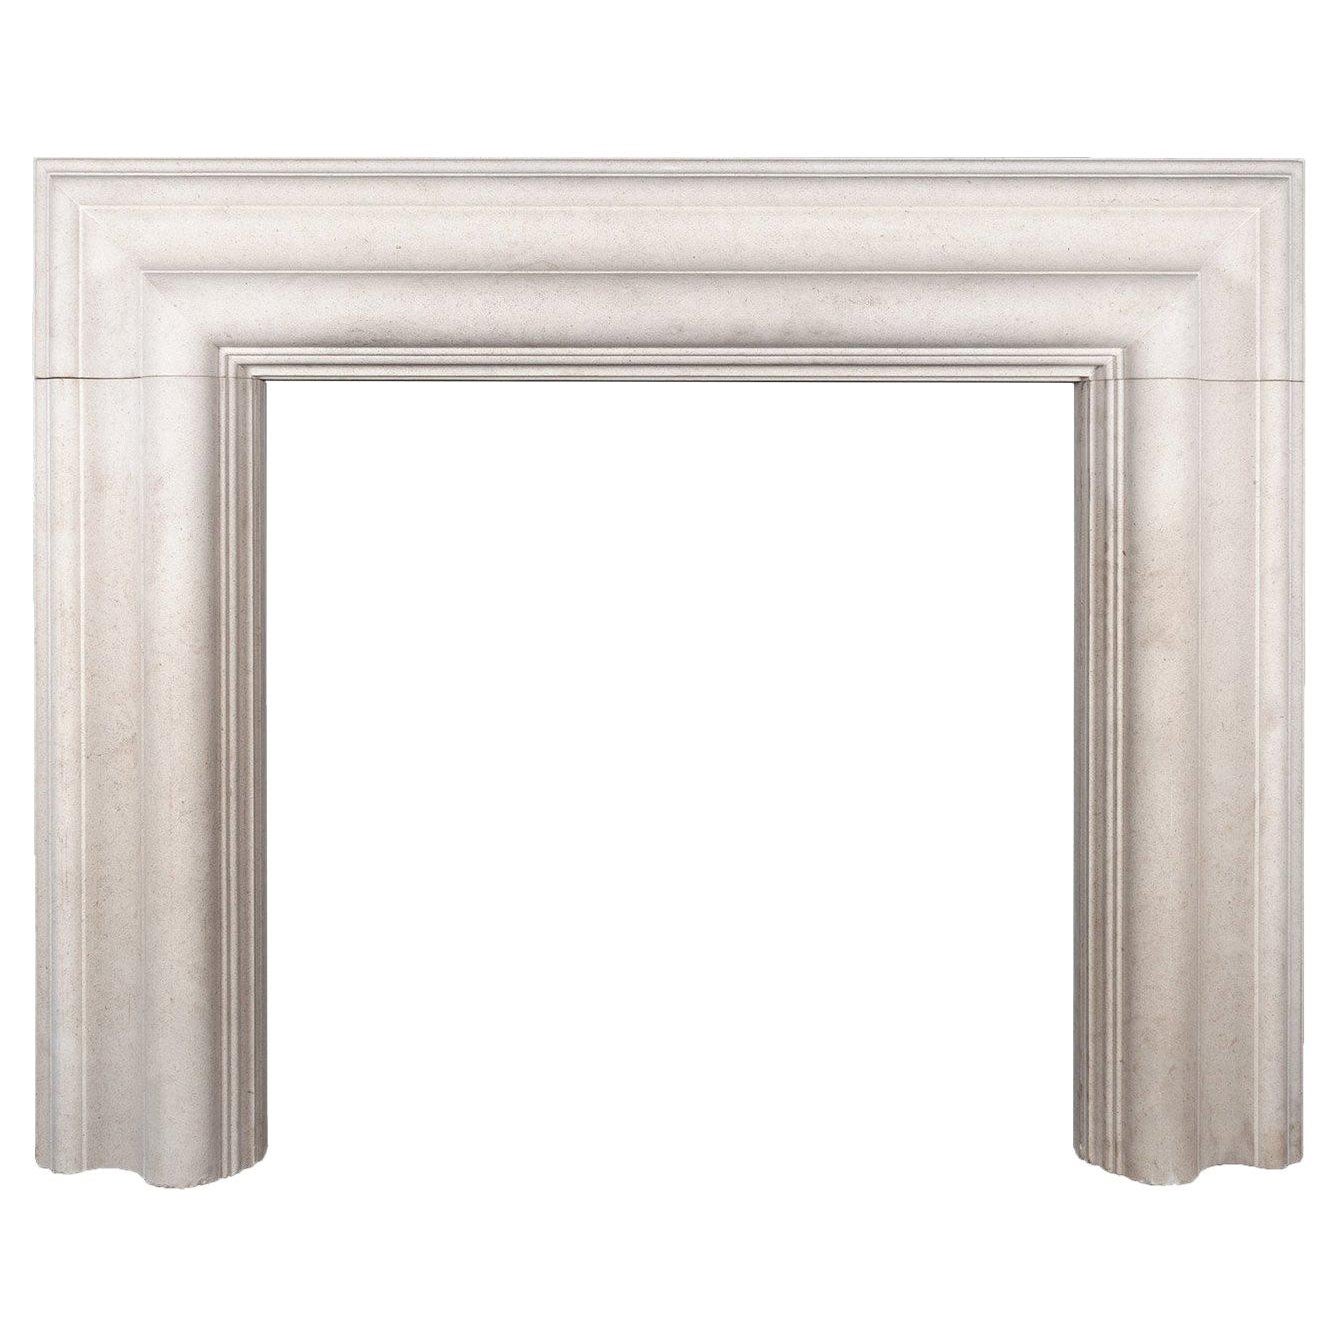 Ryan & Smith Large Stone Bolection Fireplace For Sale